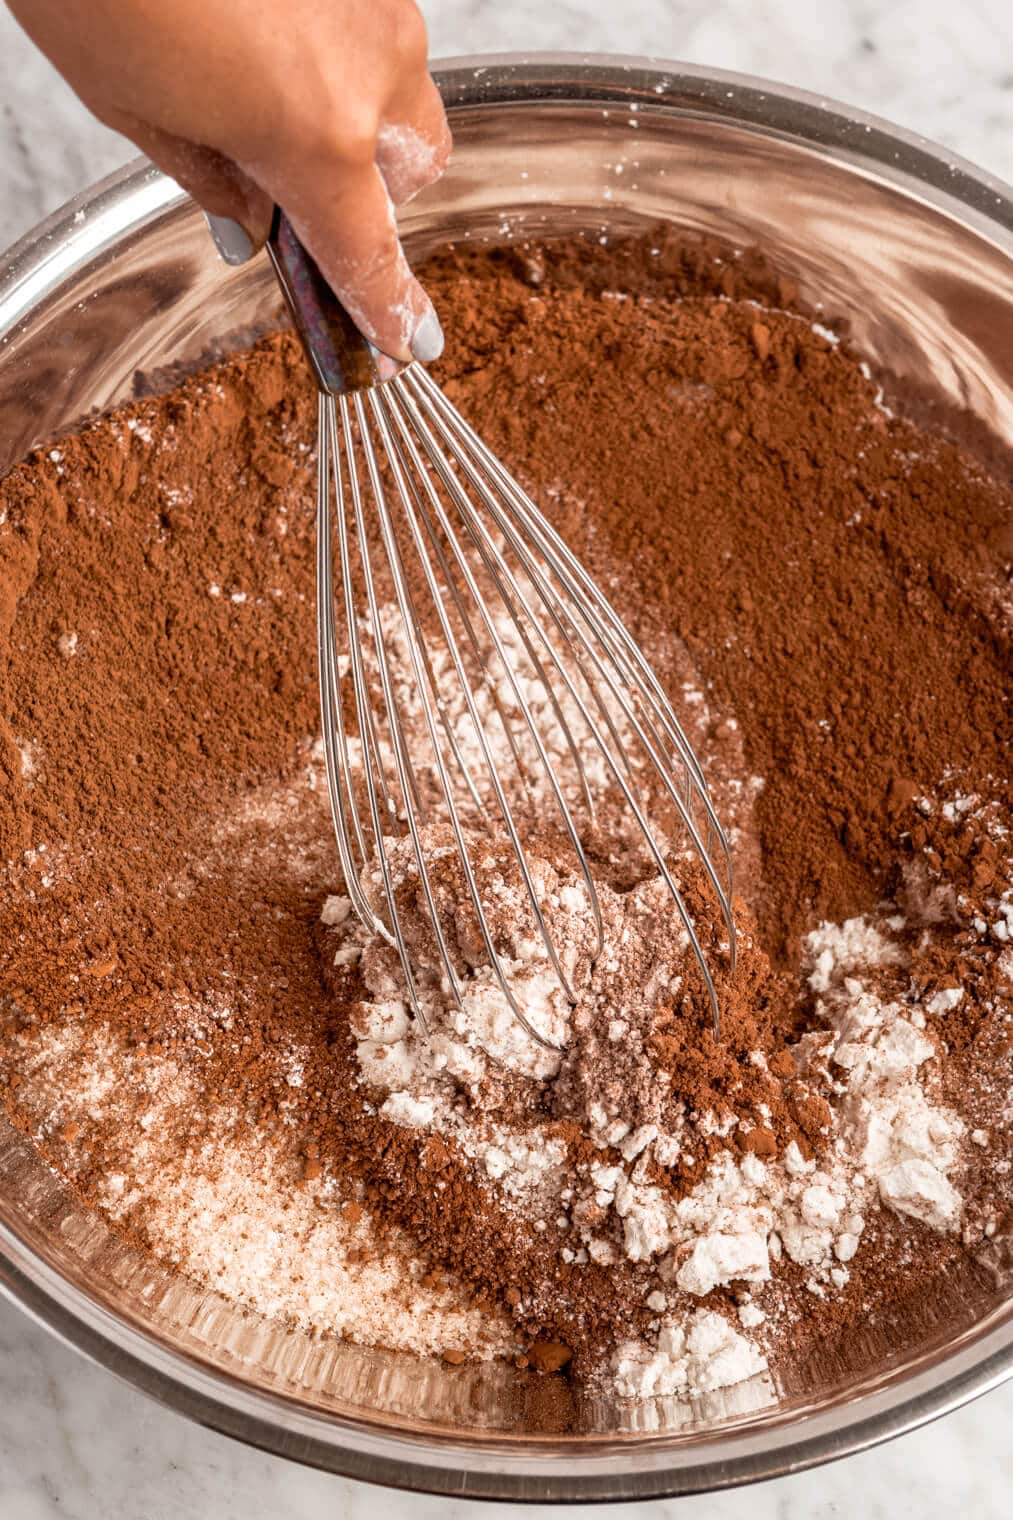 Dry chocolate cake ingredients being whisked together in a large, metal bowl.